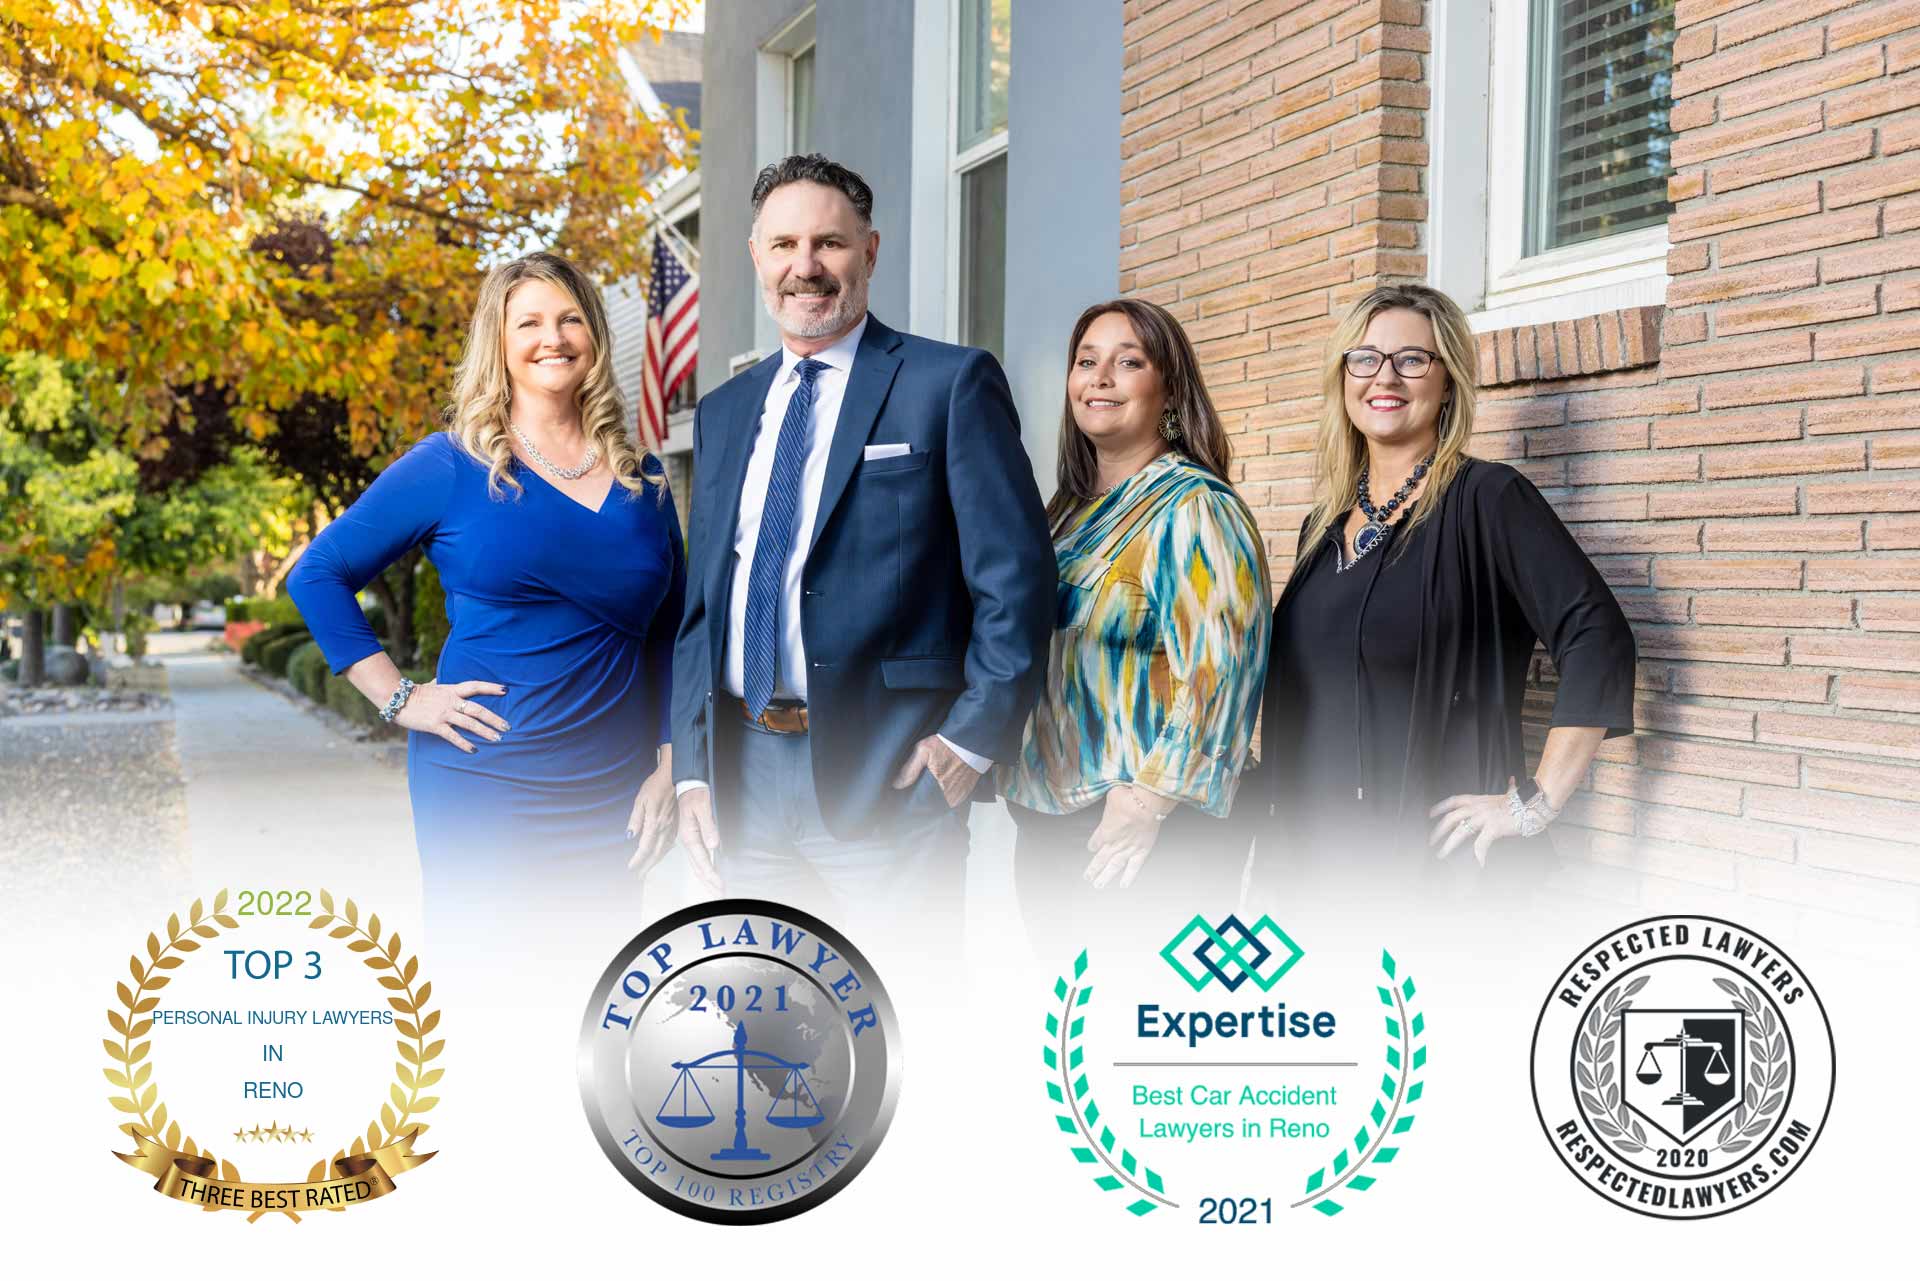 Reno wrongful death attorney Matt Dion & Associates are proud to have been awarded Top 100 Lawyer, Best Car Accident Lawyers in Reno, Top 3 Best Personal Injury Lawyers in Reno, and named a Respected Lawyer.